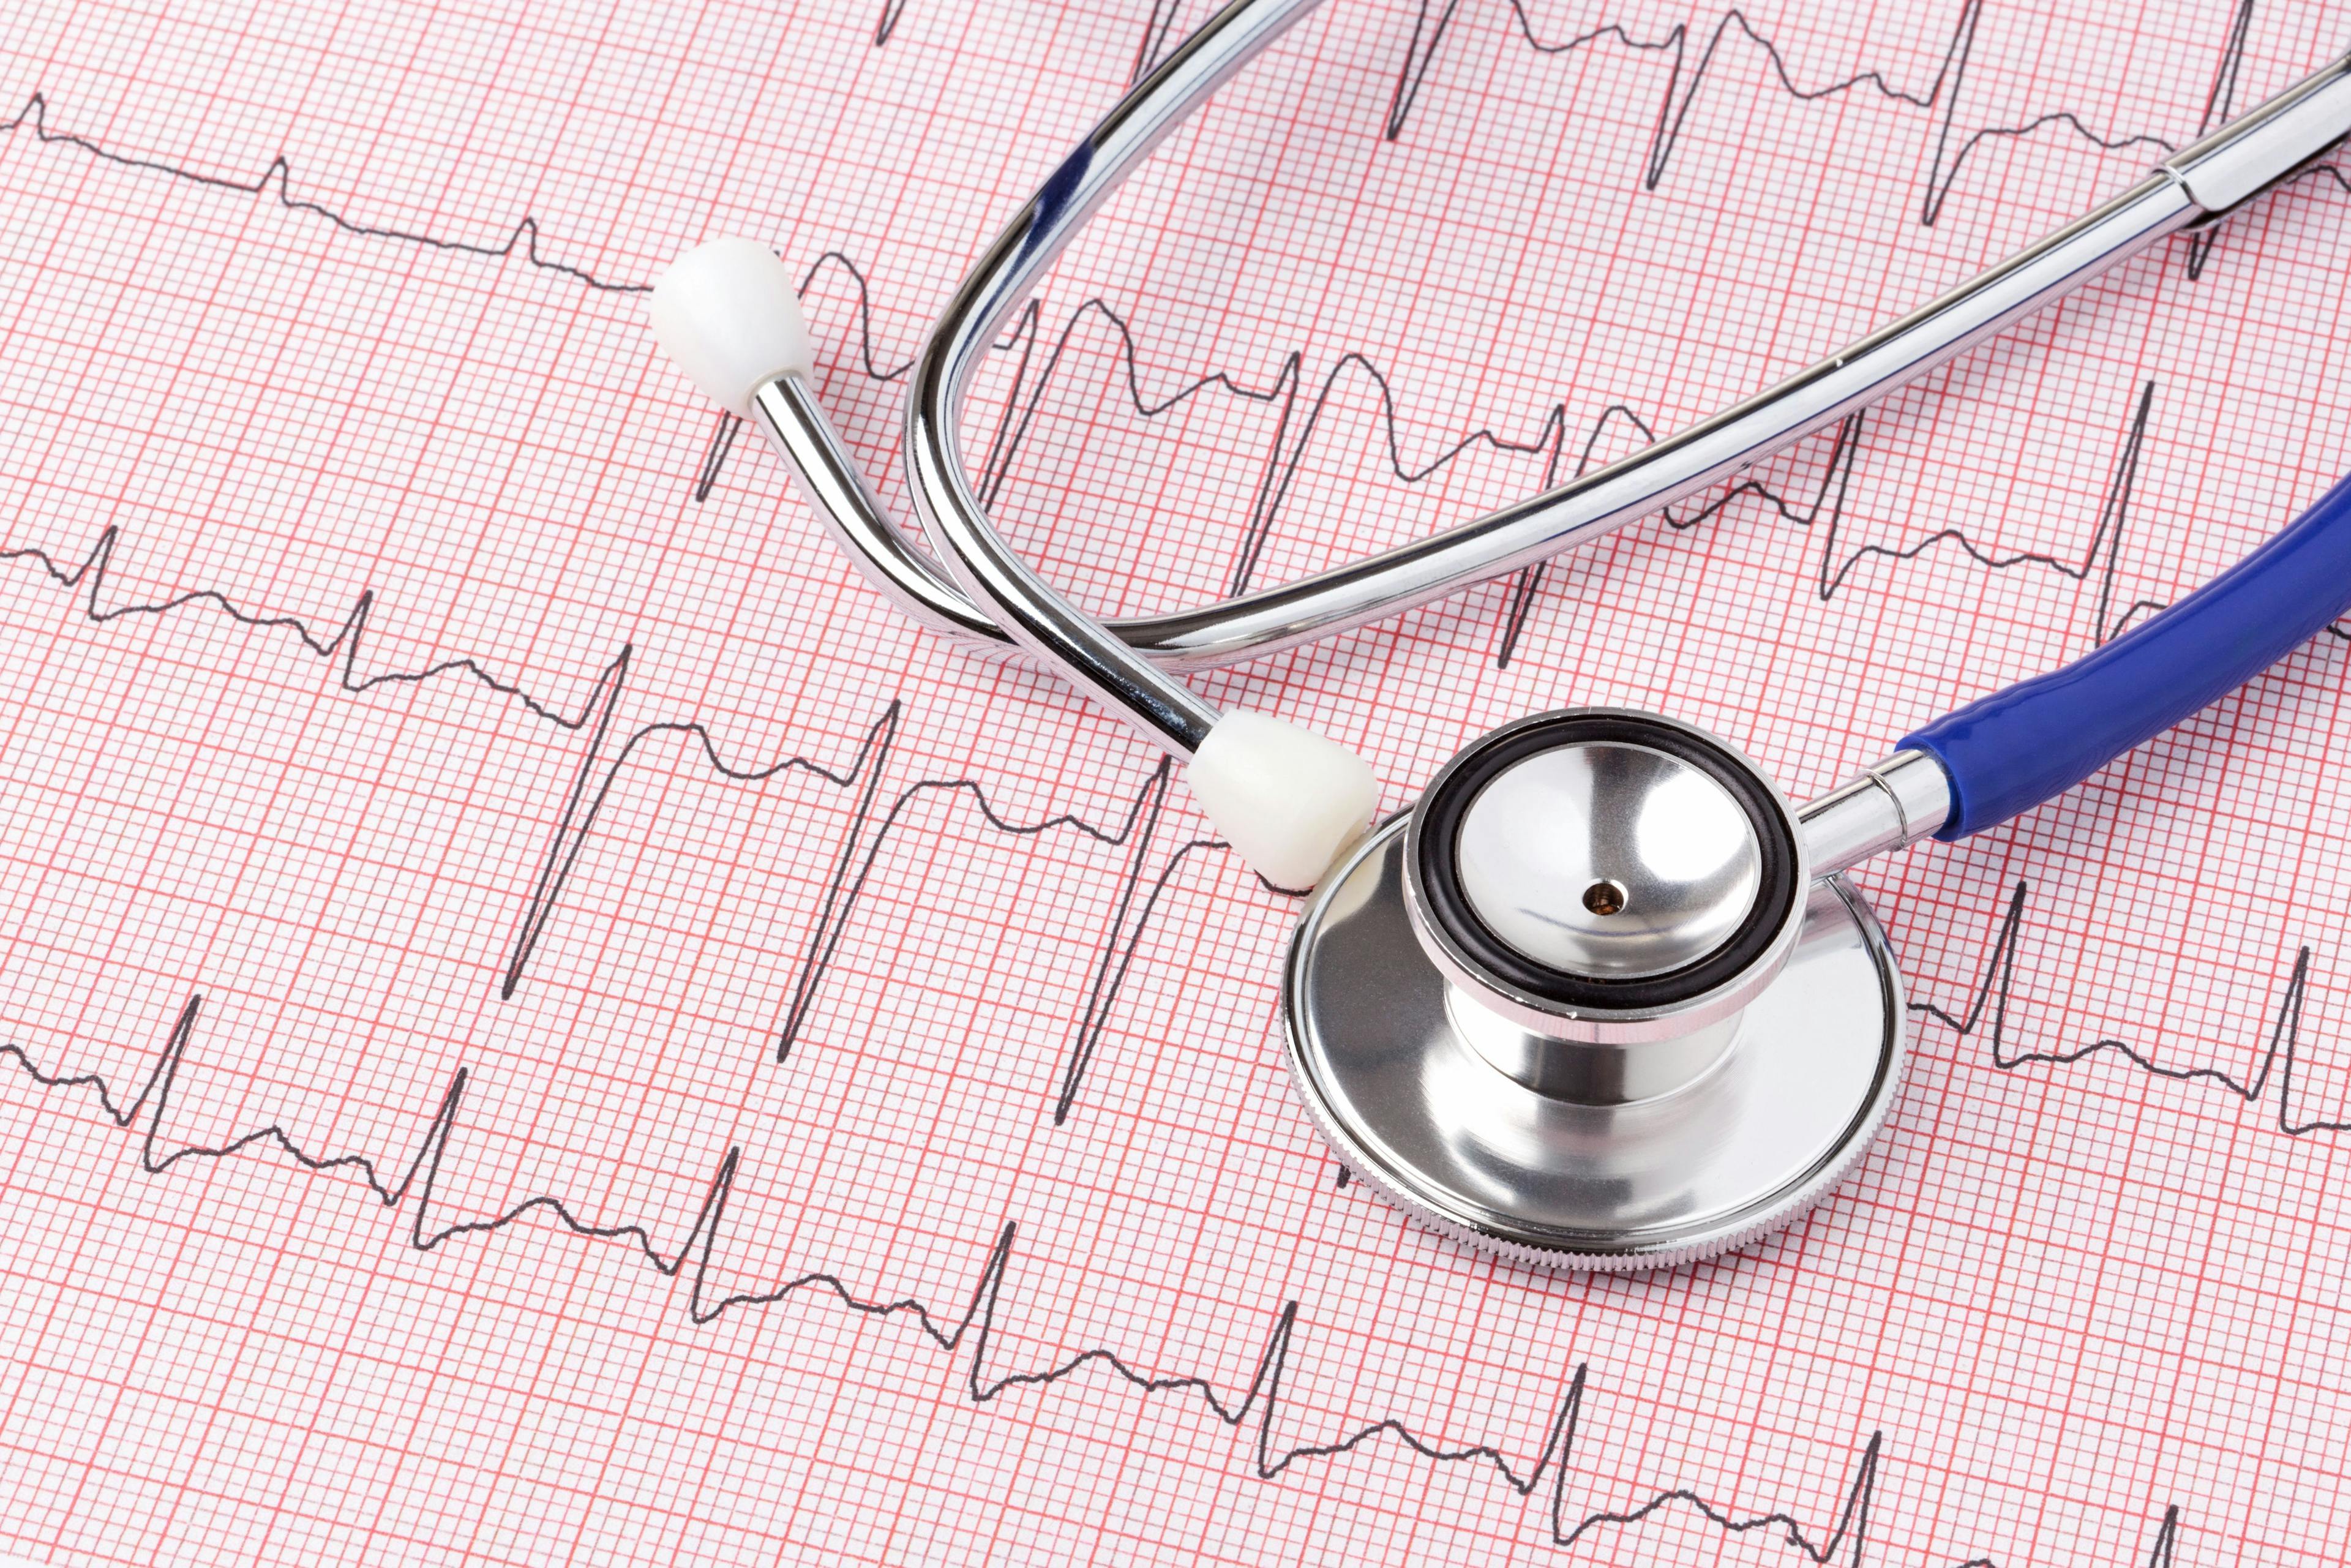 Patients with Diabetes Less Likely to Recognize, Report AFib Symptoms